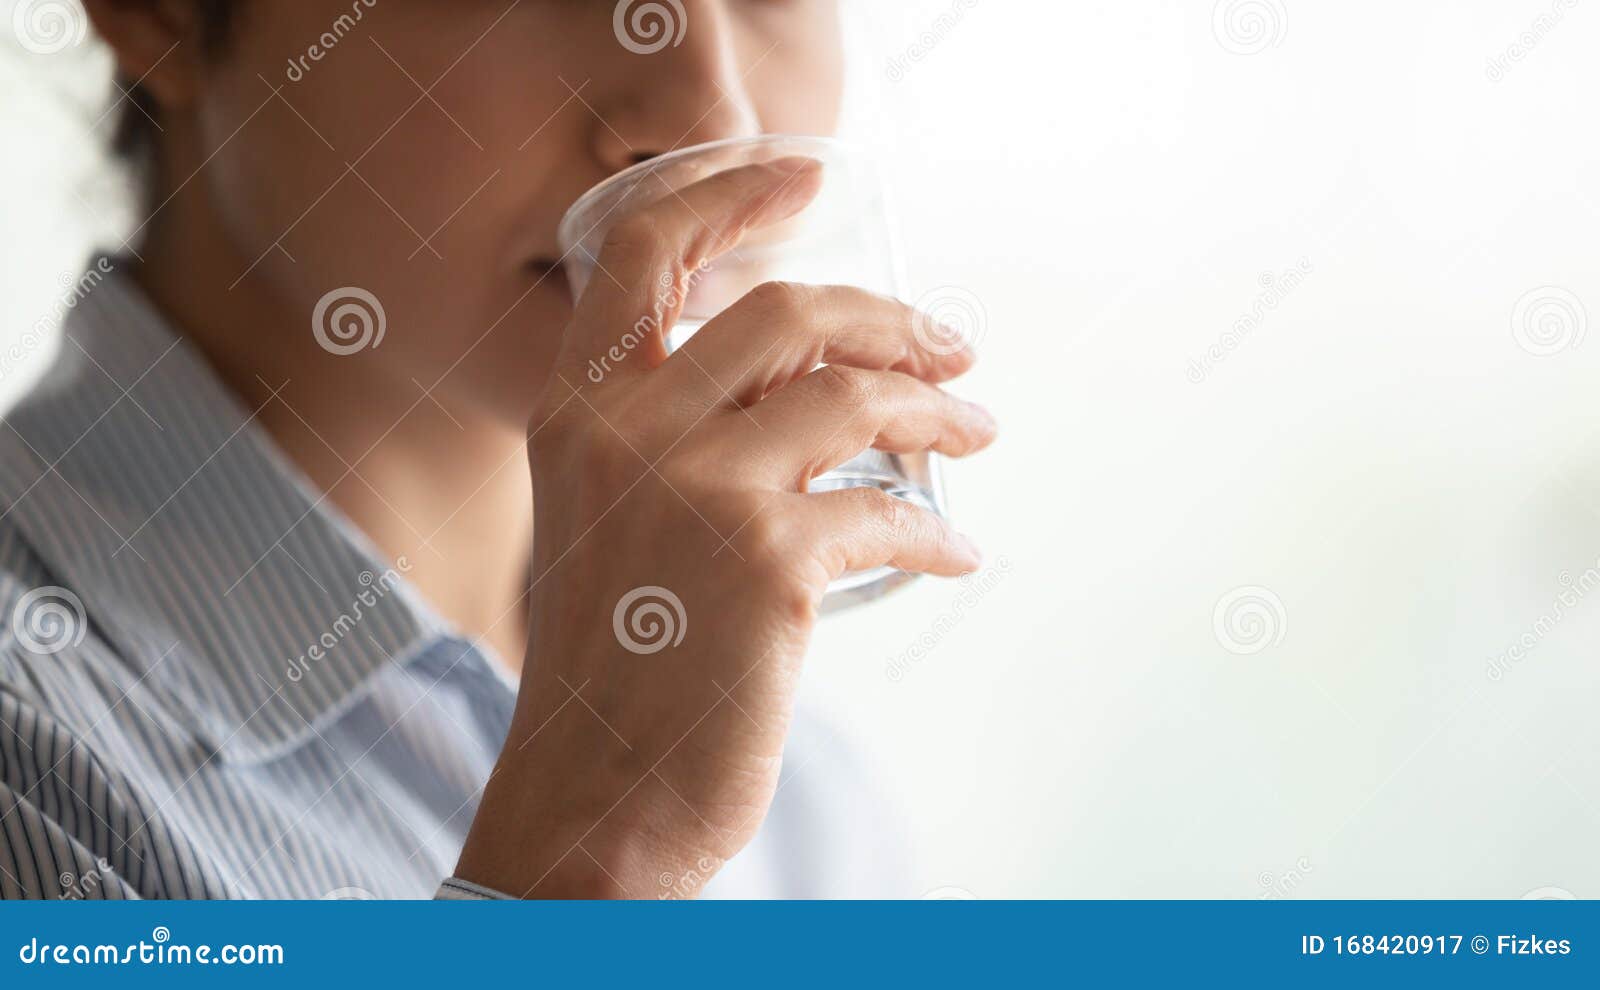 young woman holding glass sip filtered mineral water, close up